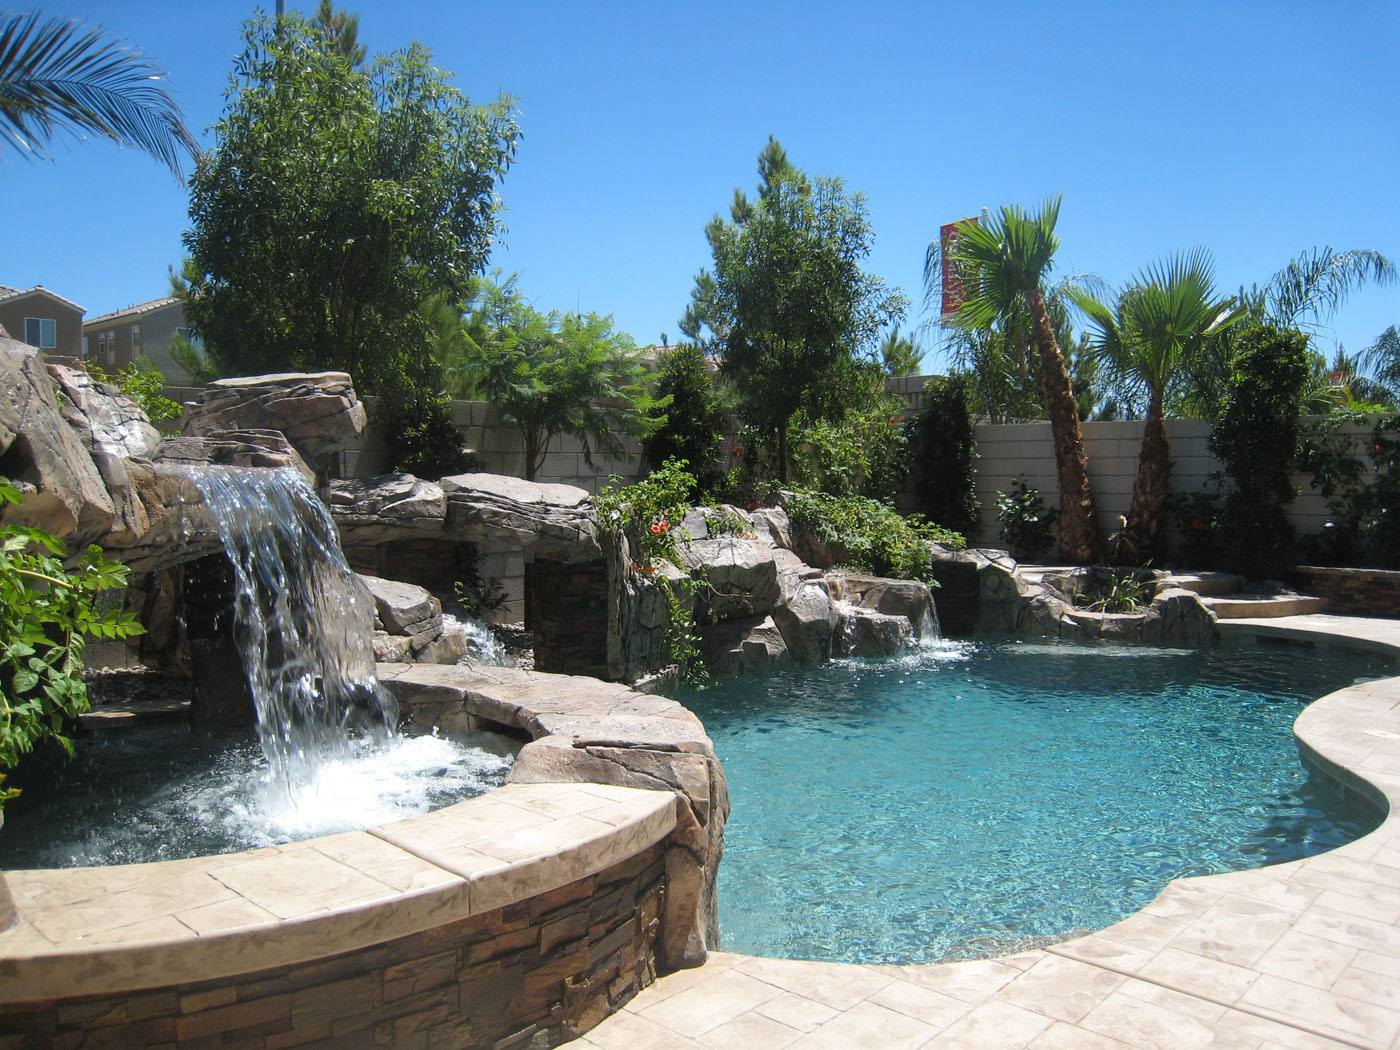 For over 70 years, Anthony & Sylvan has been designing and building quality swimming pools for families in Las Vegas, and has been repeatedly recognized for its reputation for excellence. This reputation was earned by providing high value to their customers--with the time and money that is invested into adding a swimming pool to a backyard, you want the right swimming pool builder to do the job properly, professionally and with high quality workmanship. Contact Anthony & Sylvan today for free designs and estimates on the pool of your dreams! 1-877-SAY-SWIM (729-7946) http://www.anthonysylvan.com/locations/nevada/